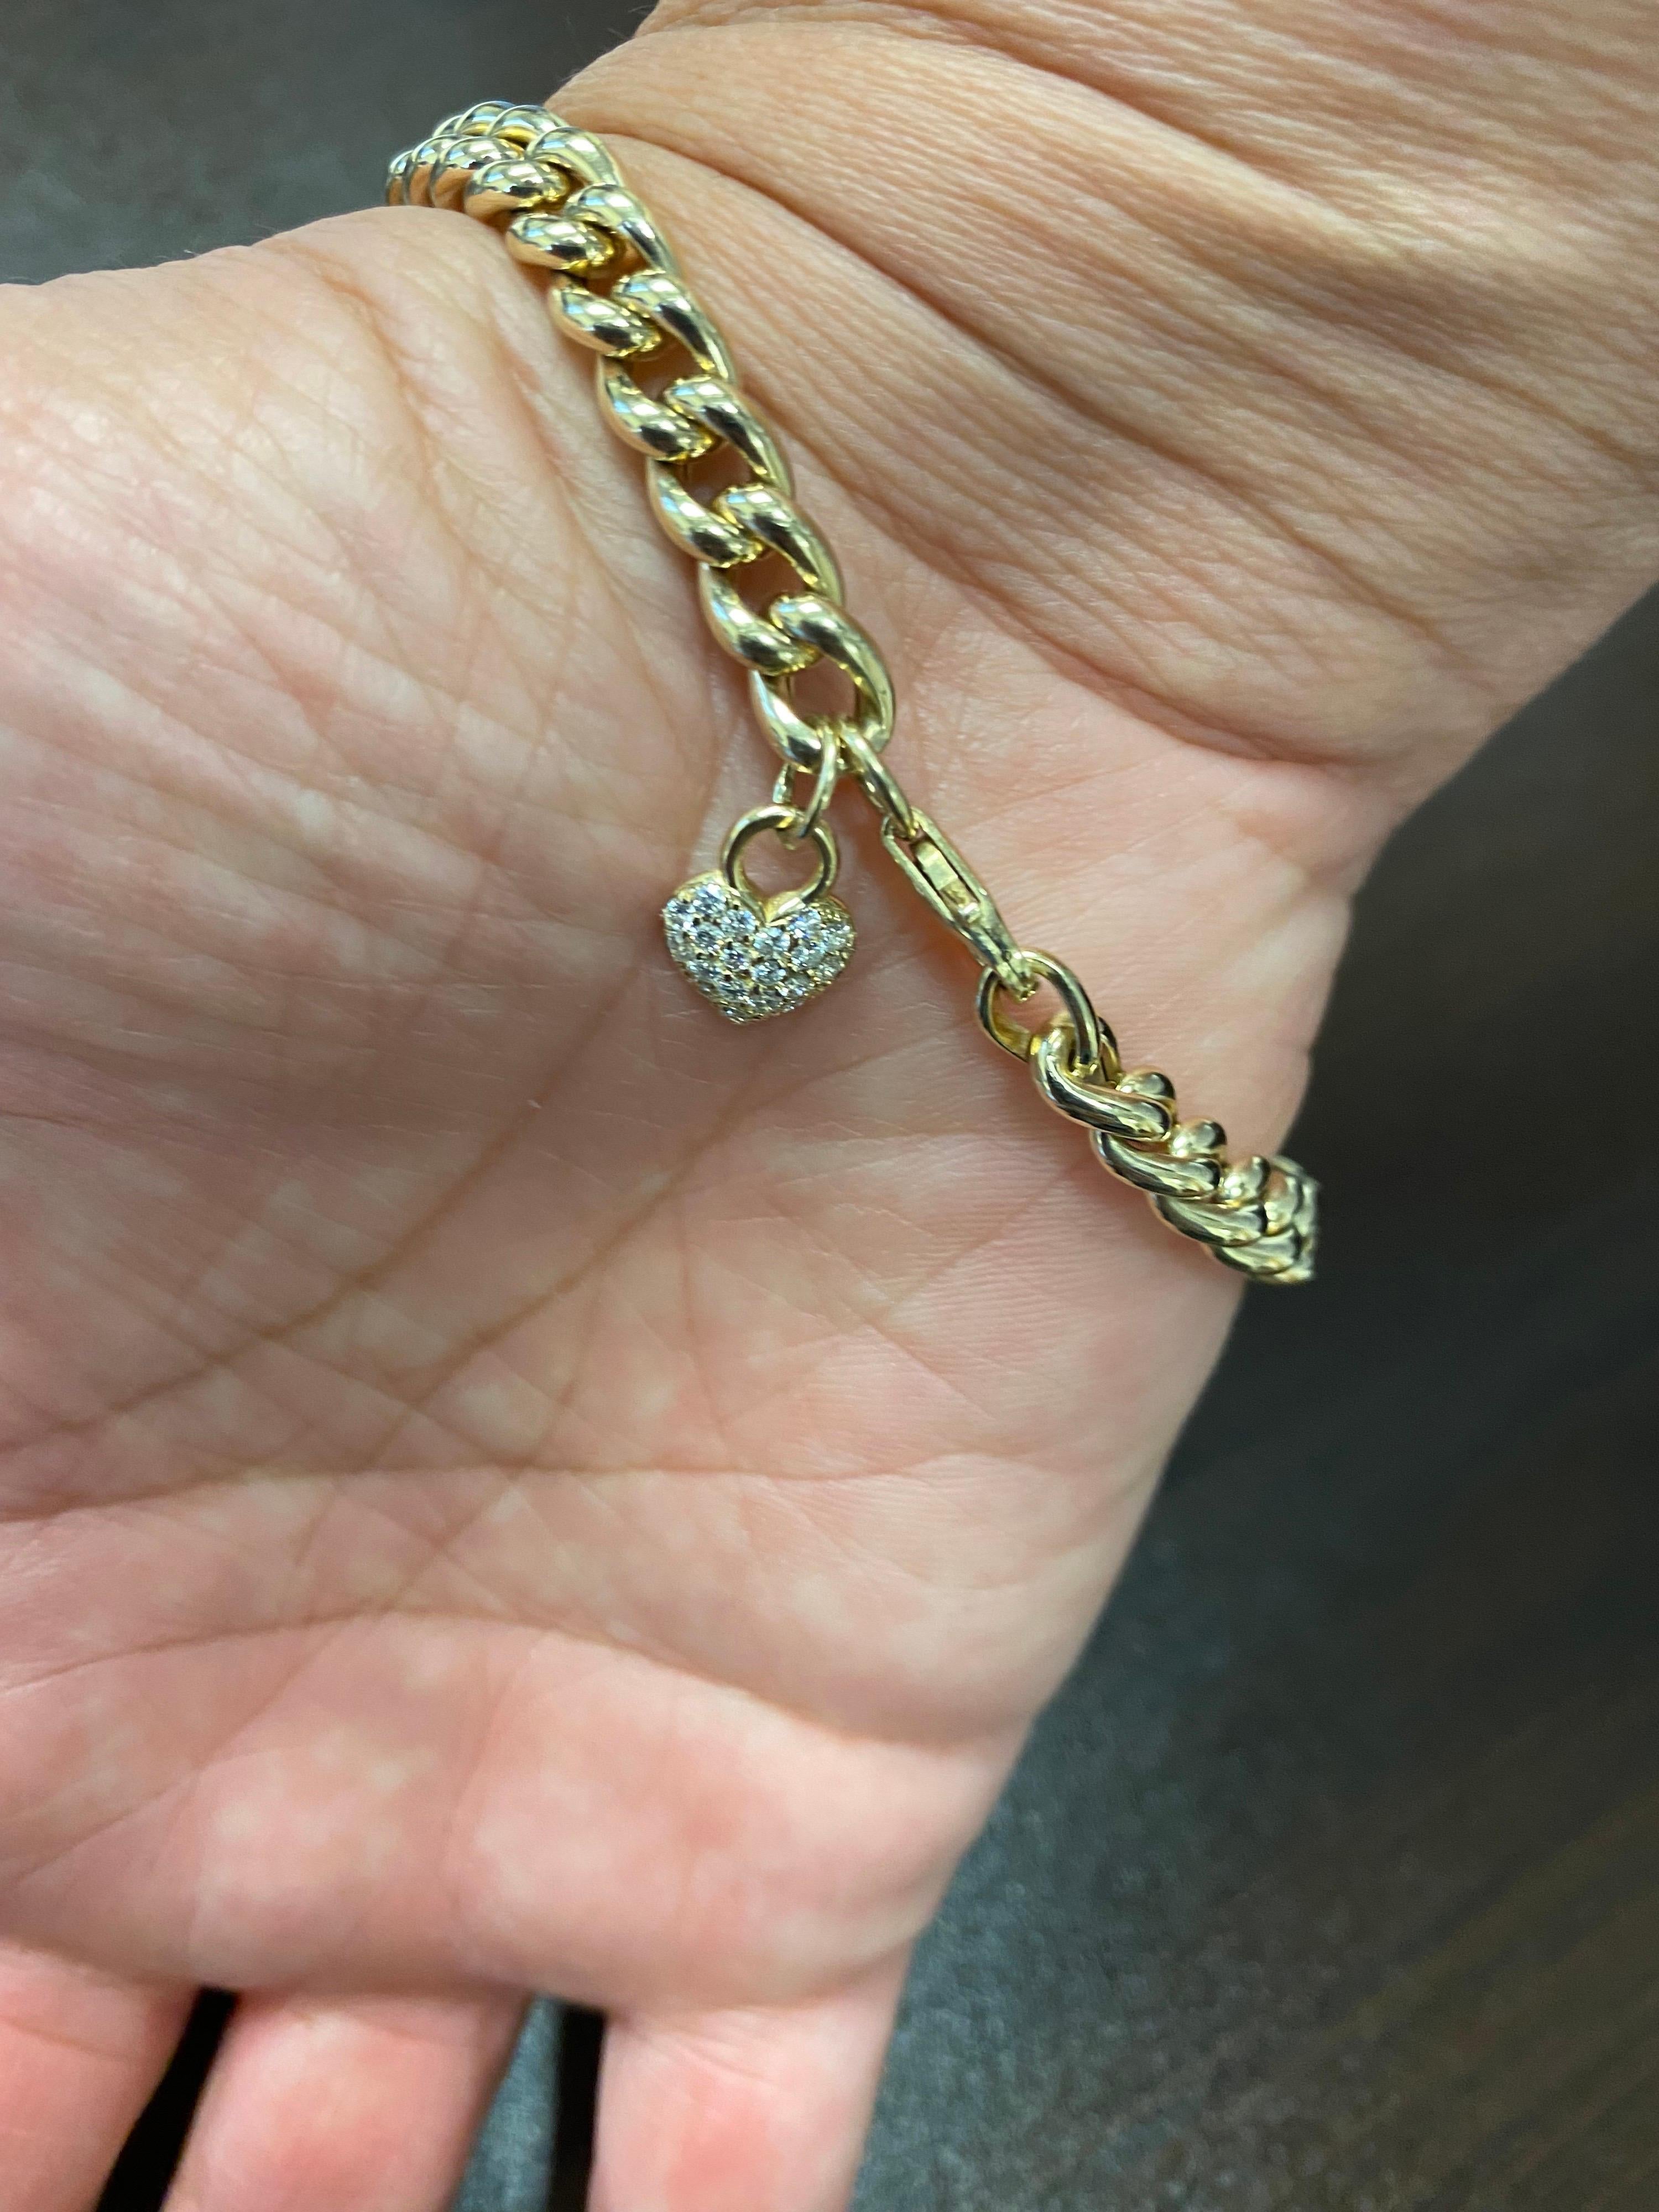 Diamond bracelet set in 18K yellow gold Cuban link. Diamonds also set on the heart clasp of the bracelet. The total carat weight of the bracelet is 1.25. The diamonds are set with 0.01 carats each stone.
The color of the stones are G, the clarity is